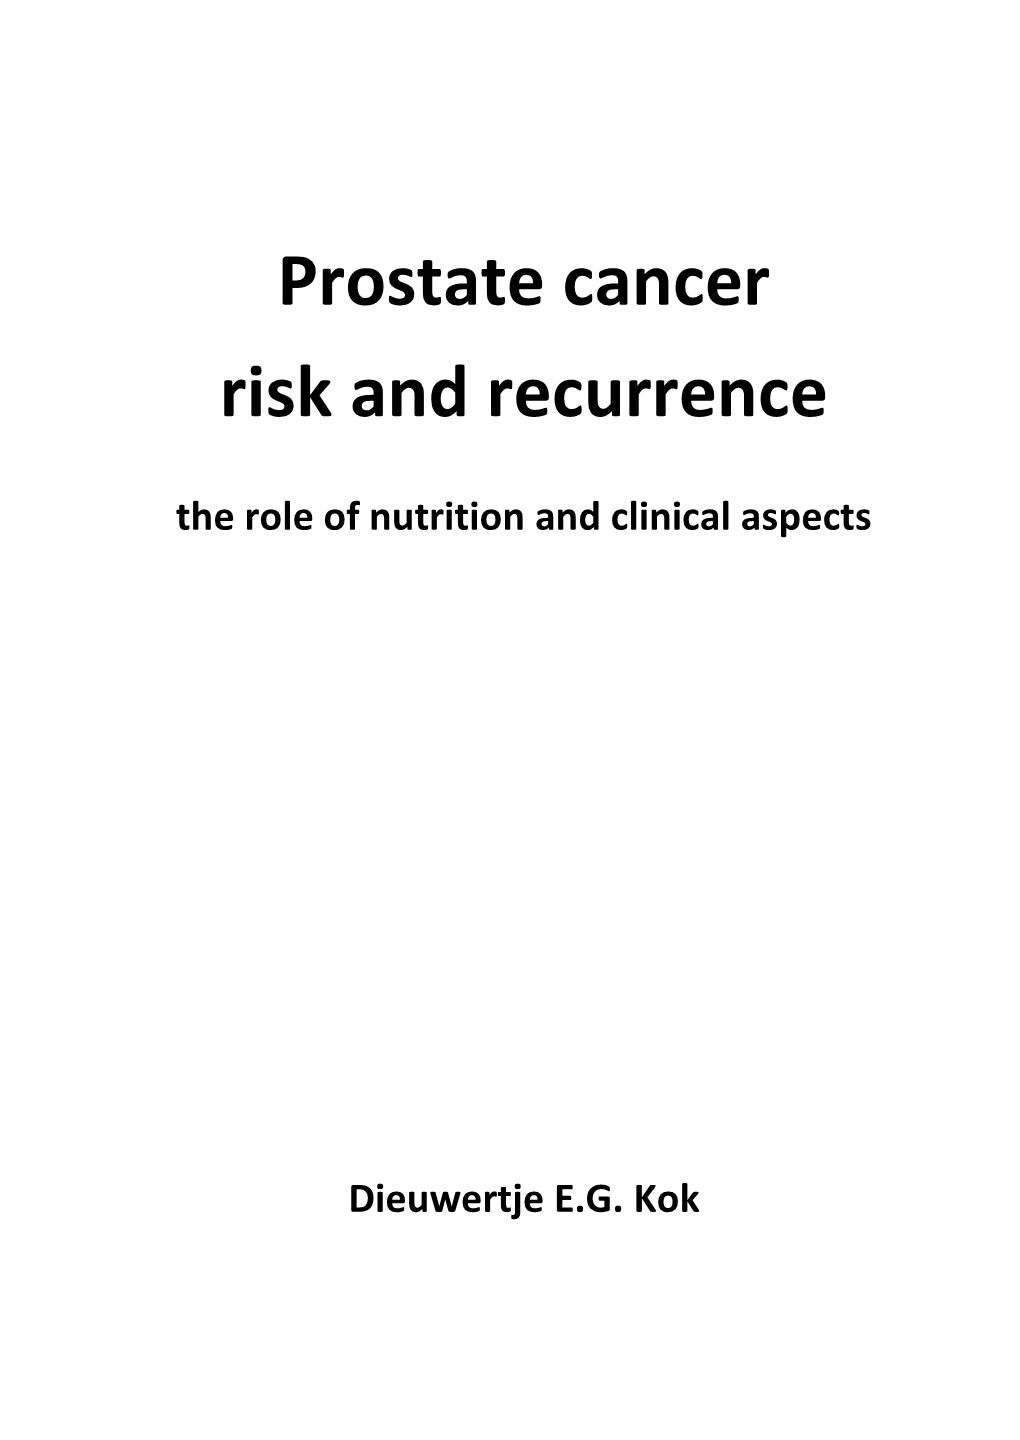 Prostate Cancer Risk and Recurrence the Role of Nutrition and Clinical Aspects